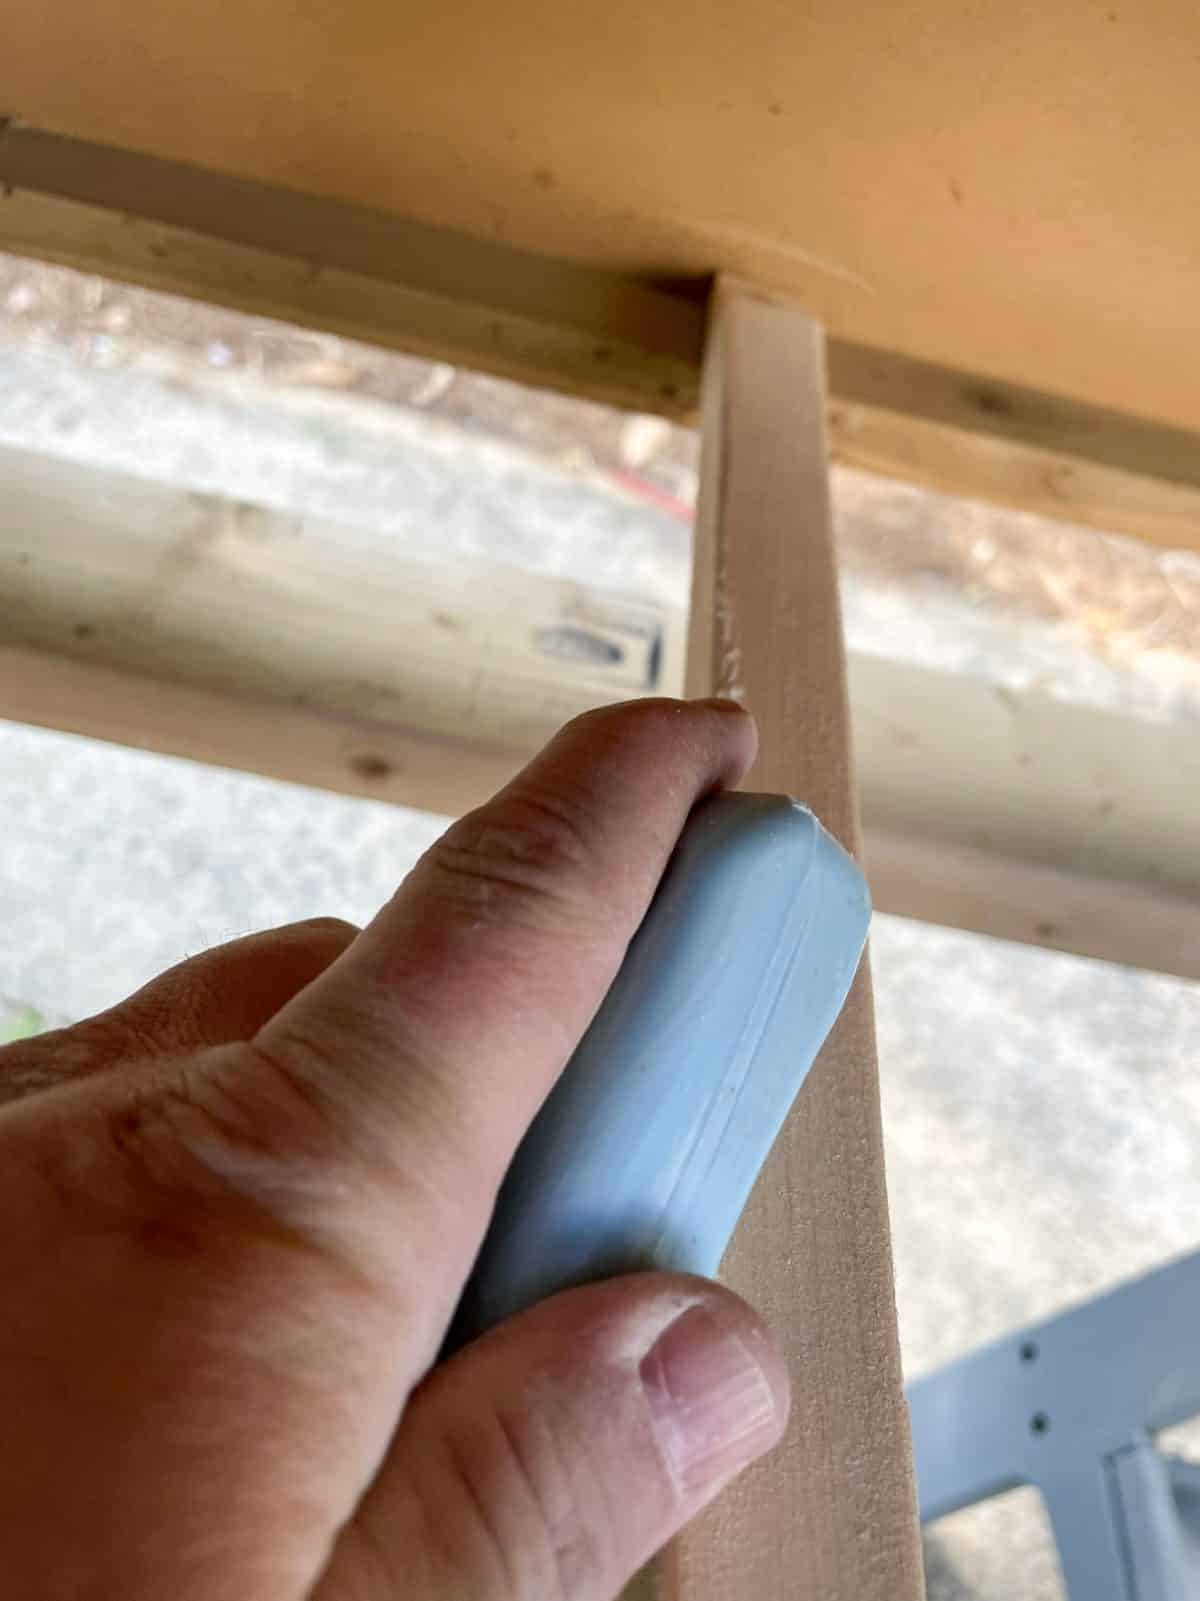 using bar of soap to lubricate the drawer slide